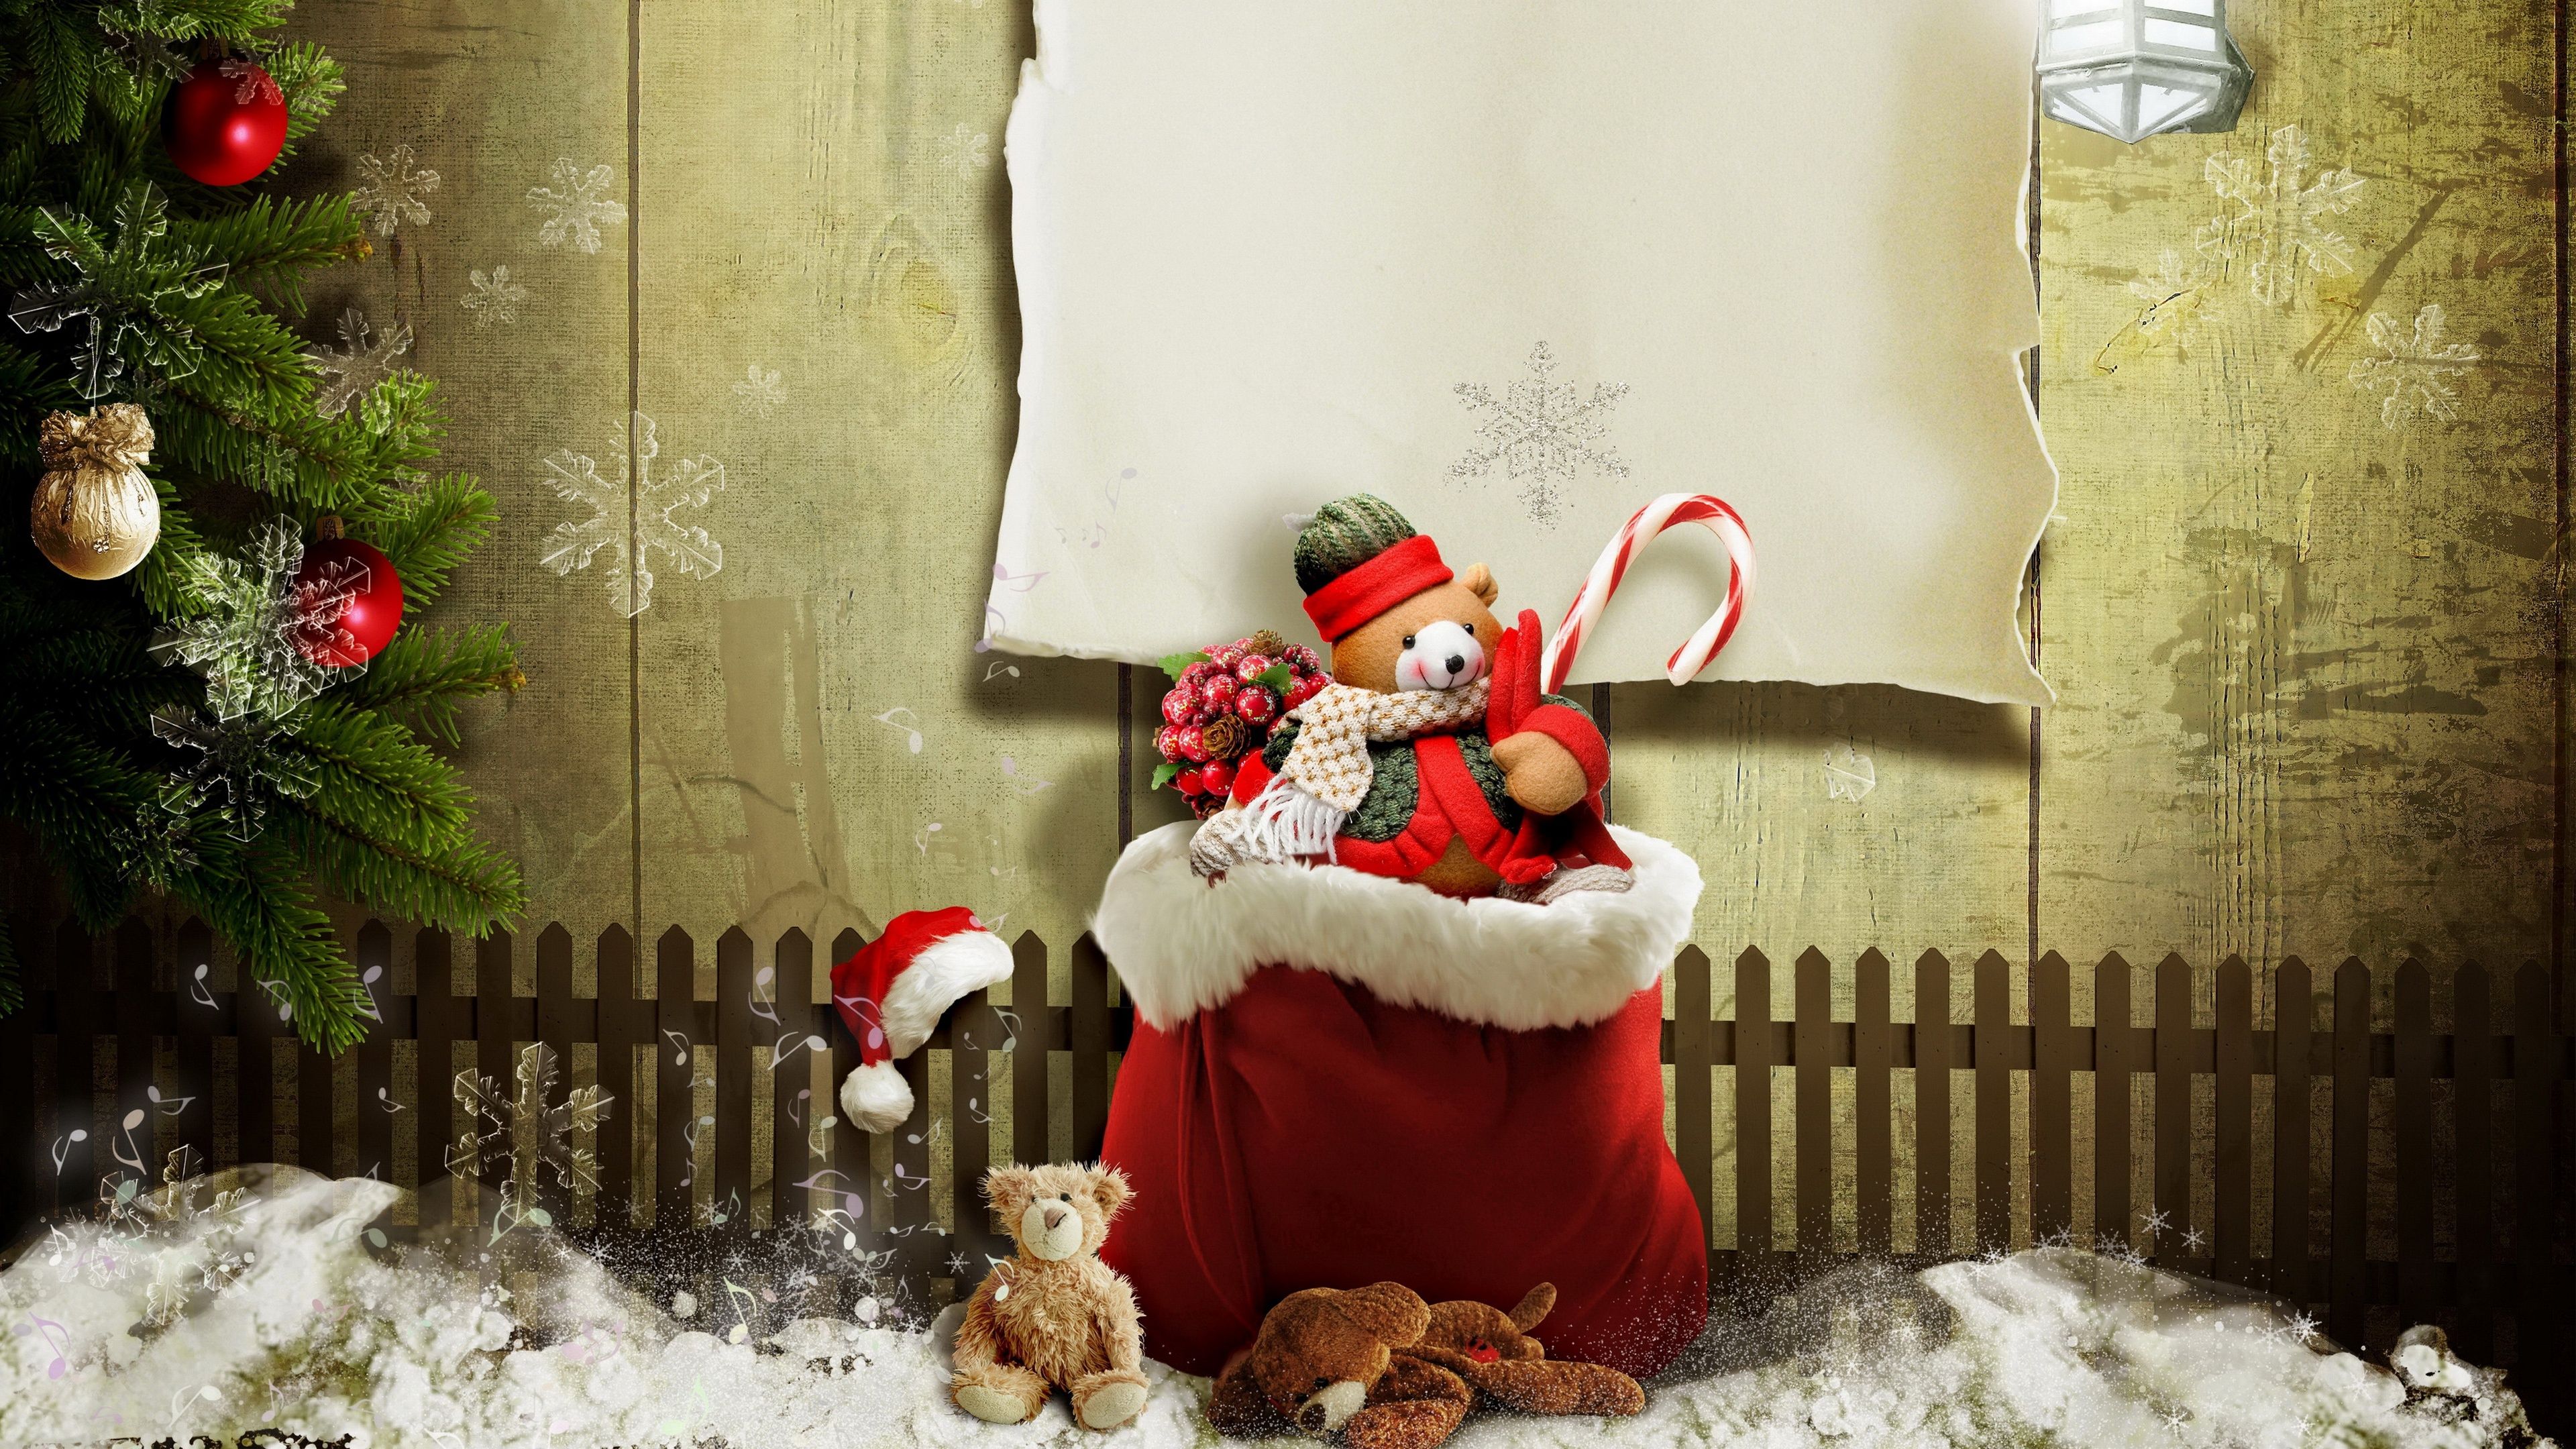 Christmas Presents Gifts Wallpaper in jpg format for free download